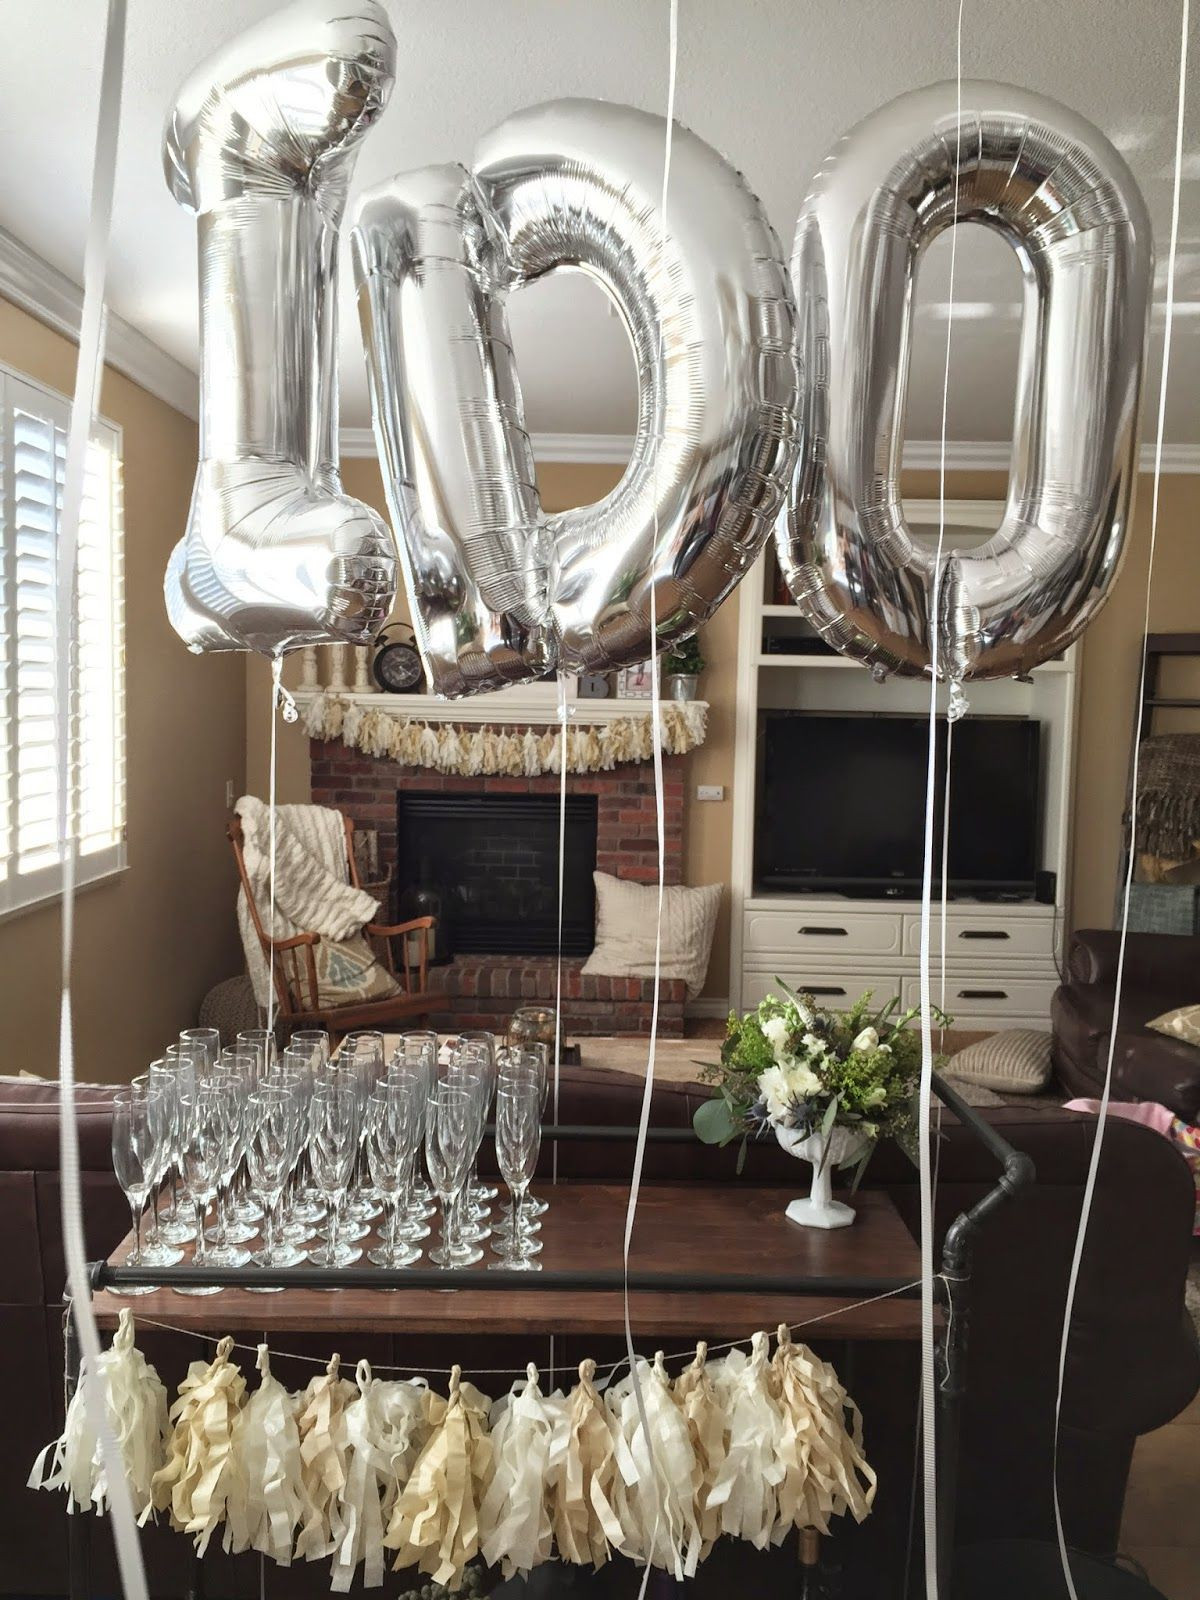 Engagement Party Decoration Ideas Pinterest
 Gold silver and white engagement party